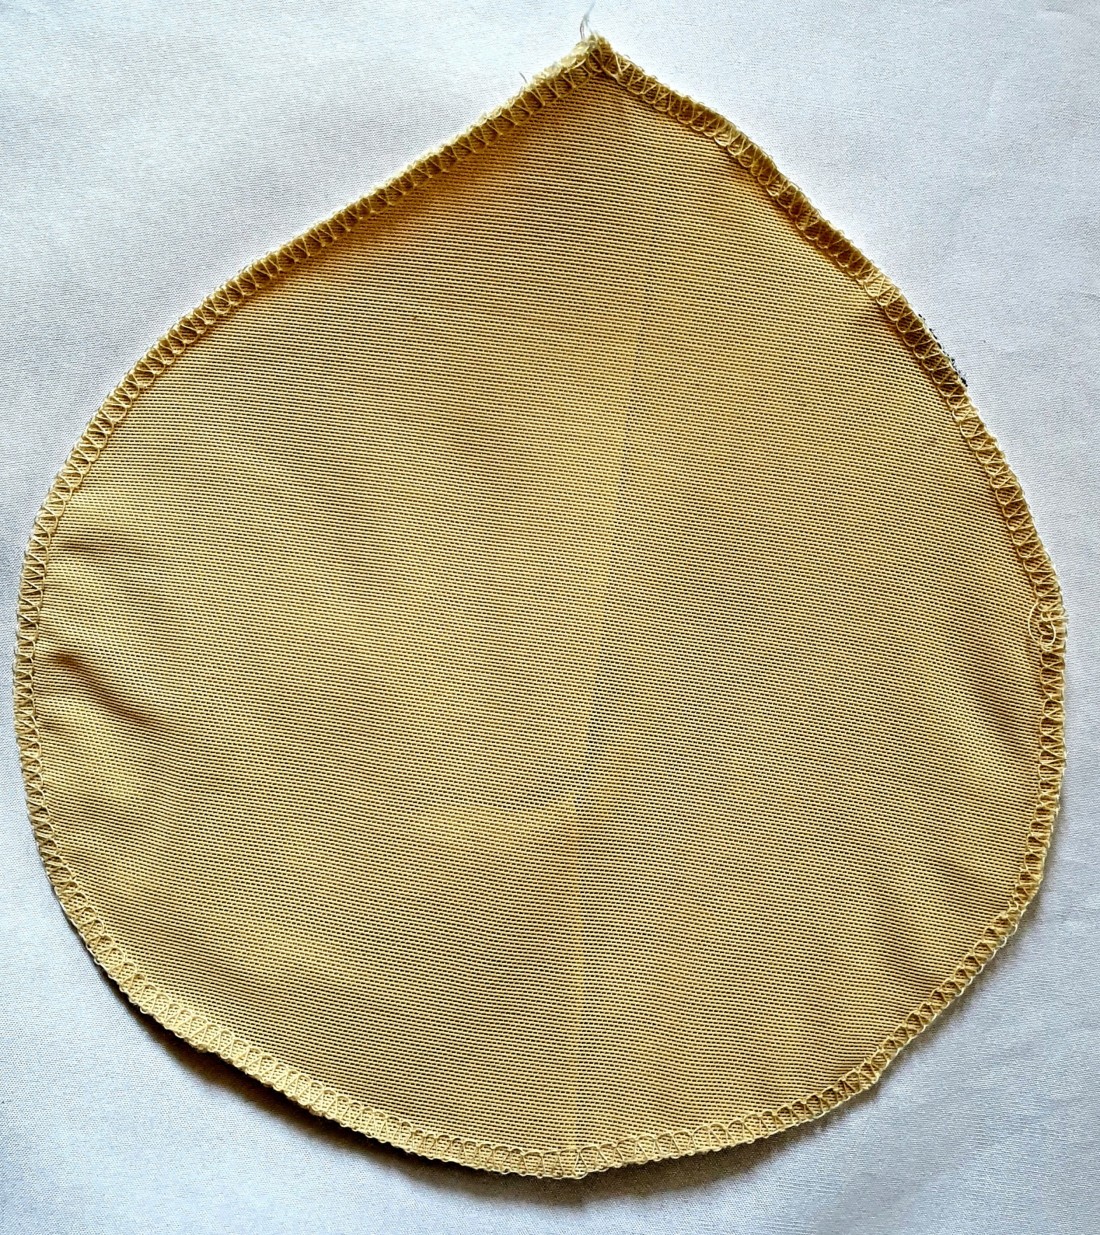 BENCOMM Cotton Cover for Silicone Breast Prosthesis Triangular Bra